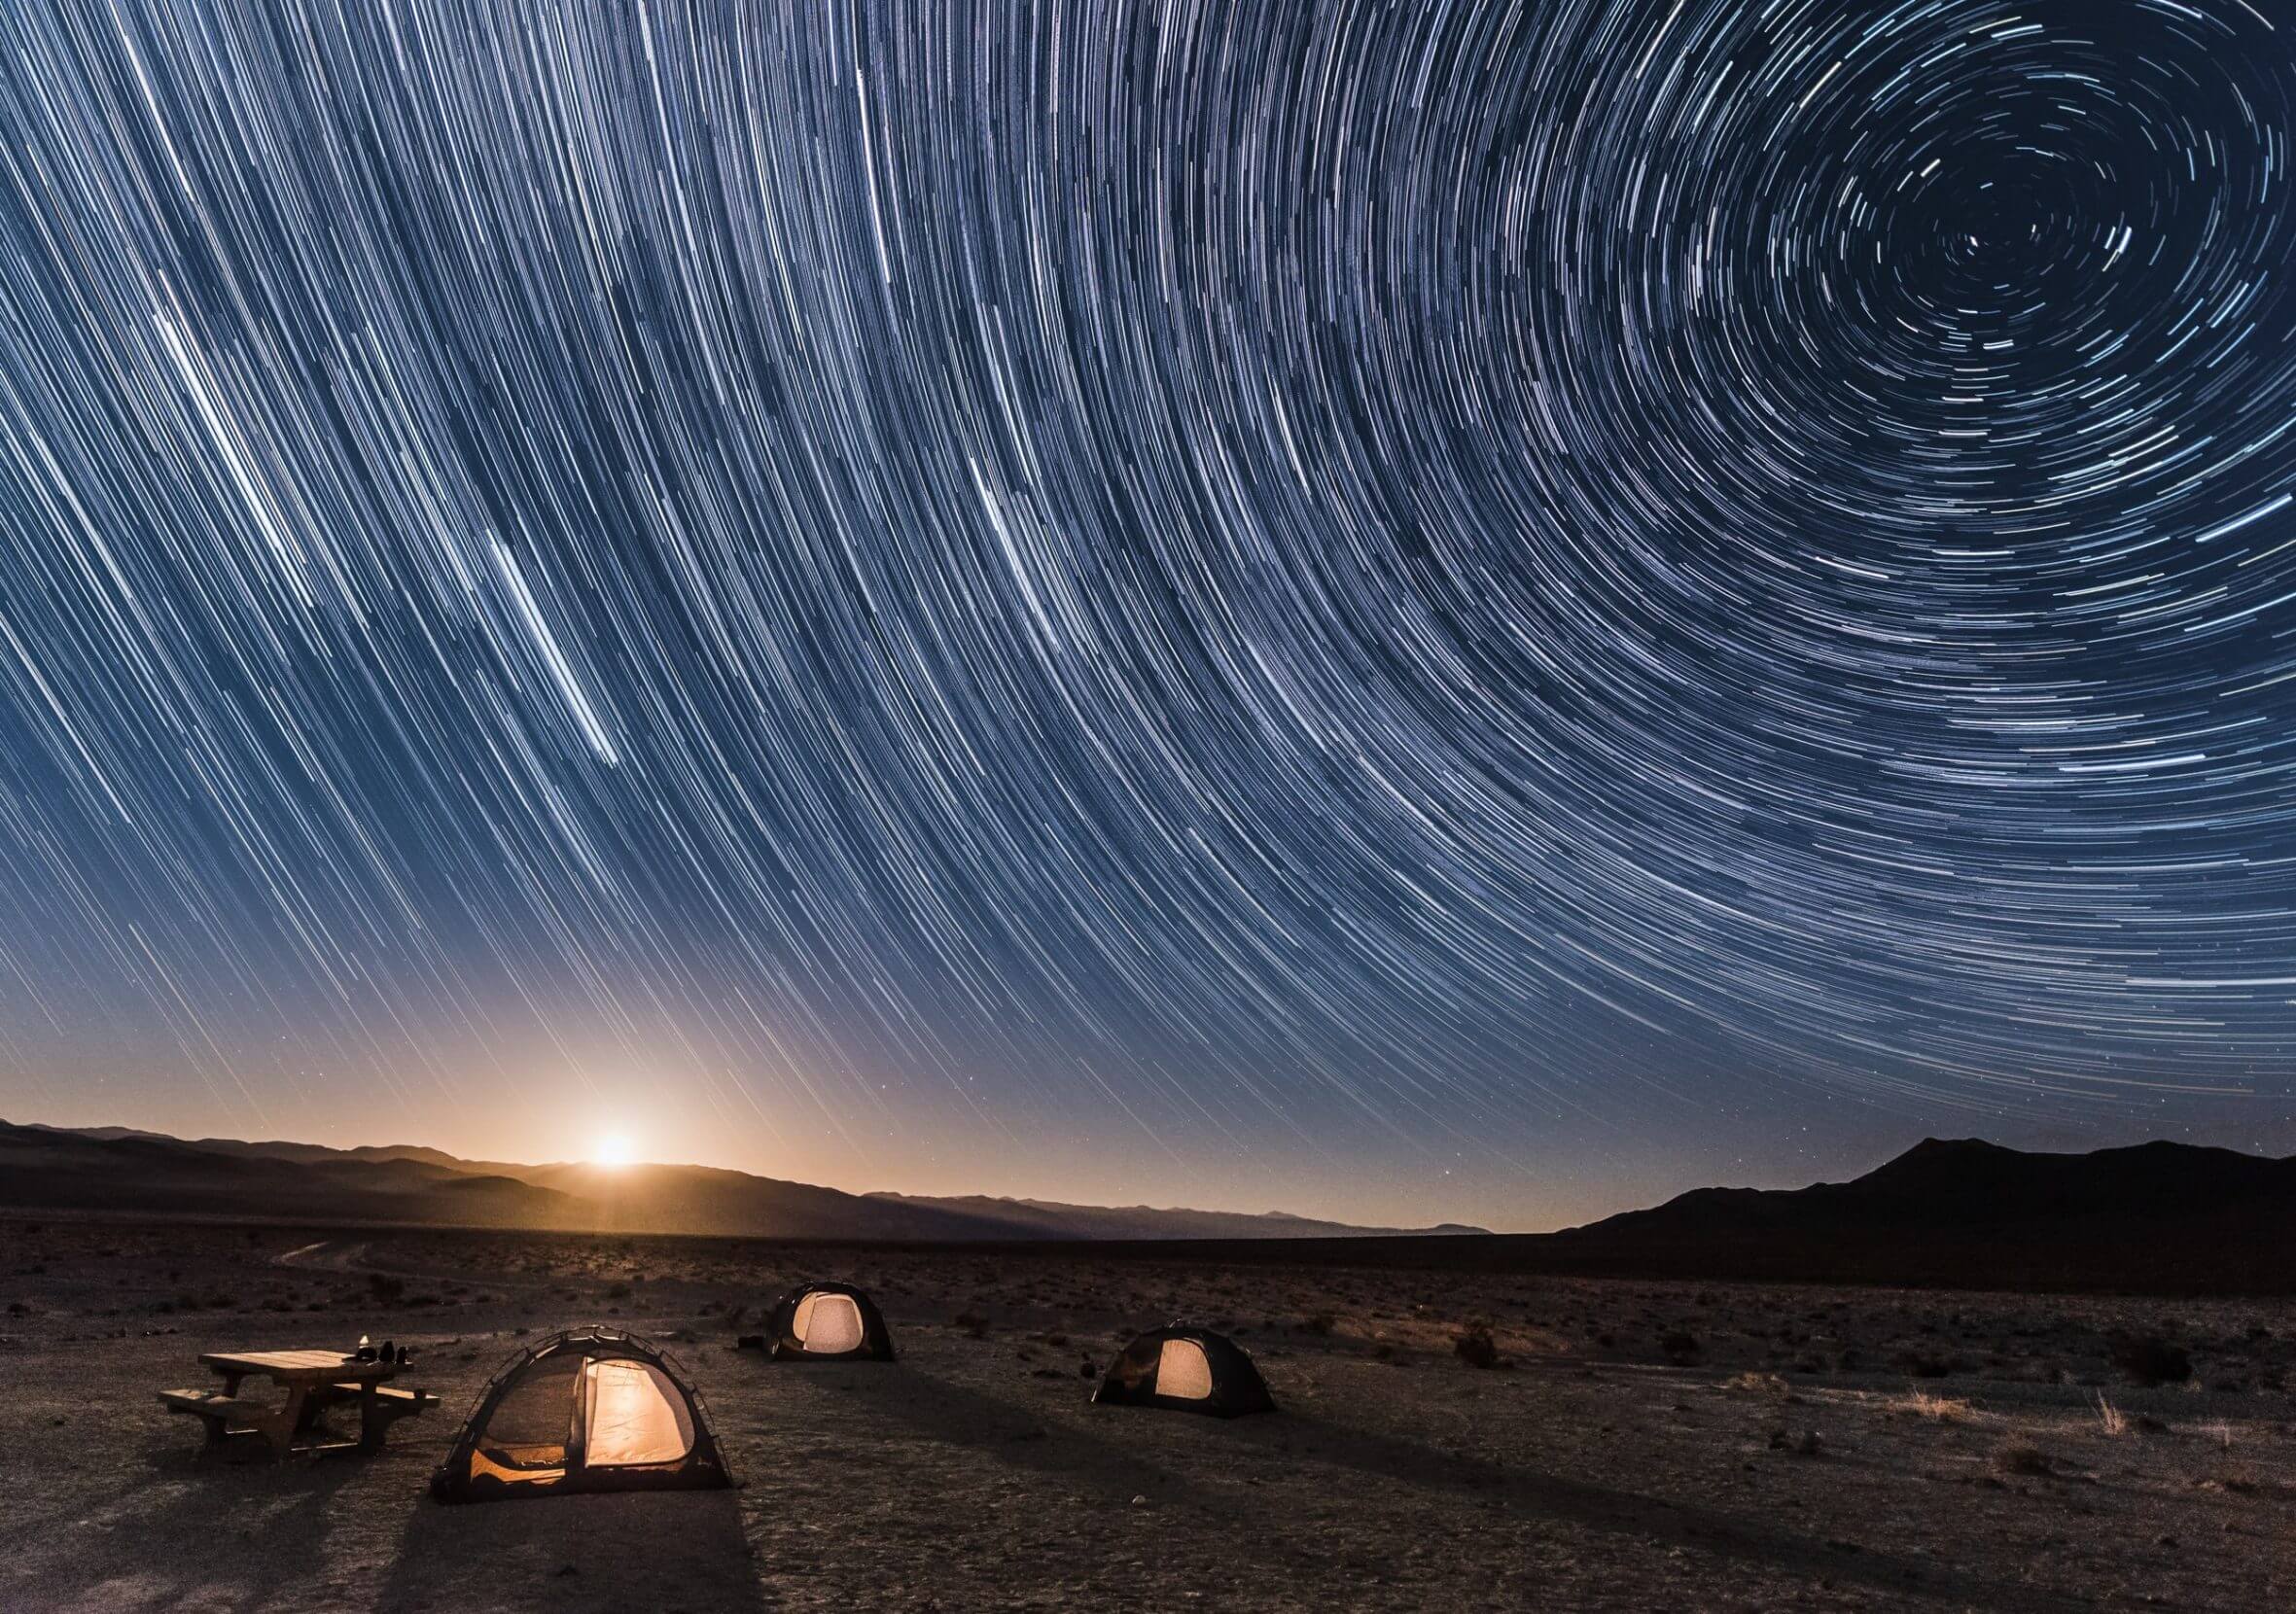 Star trails with the moon setting over a campsite in Death Valley.